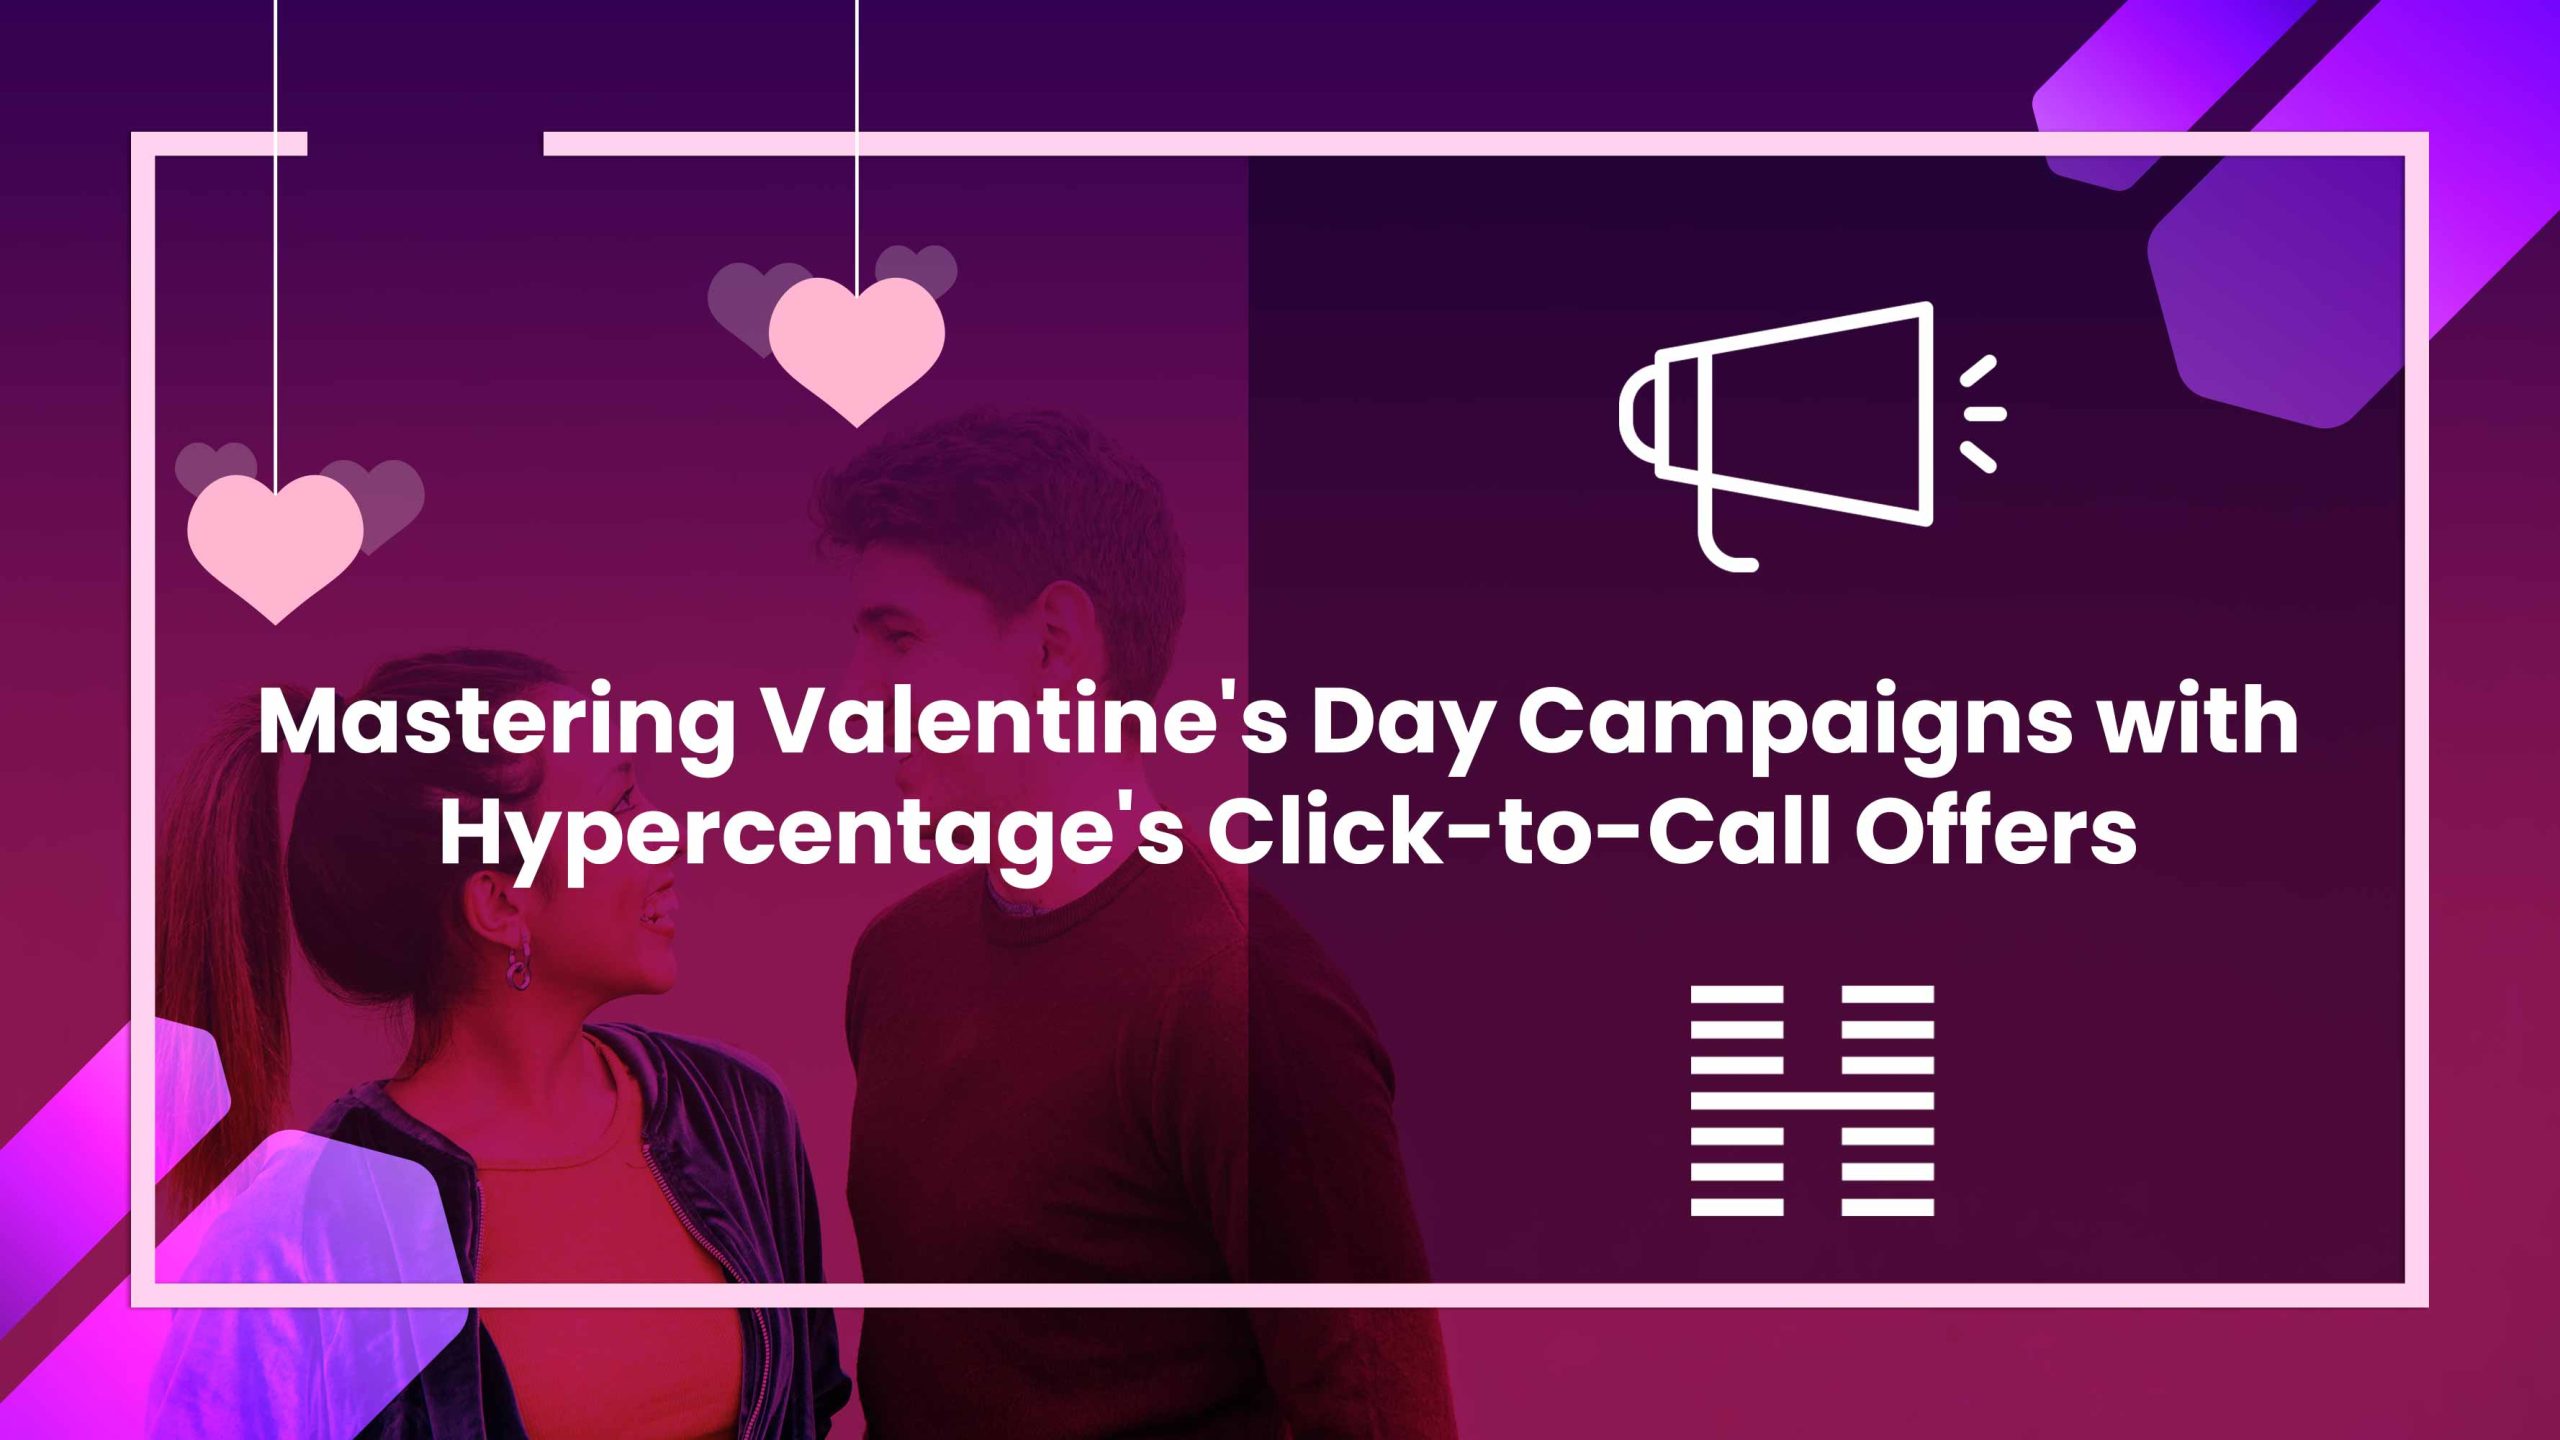 Mastering Valentine’s Day Campaigns with Hypercentage’s Click-to-Call Offers